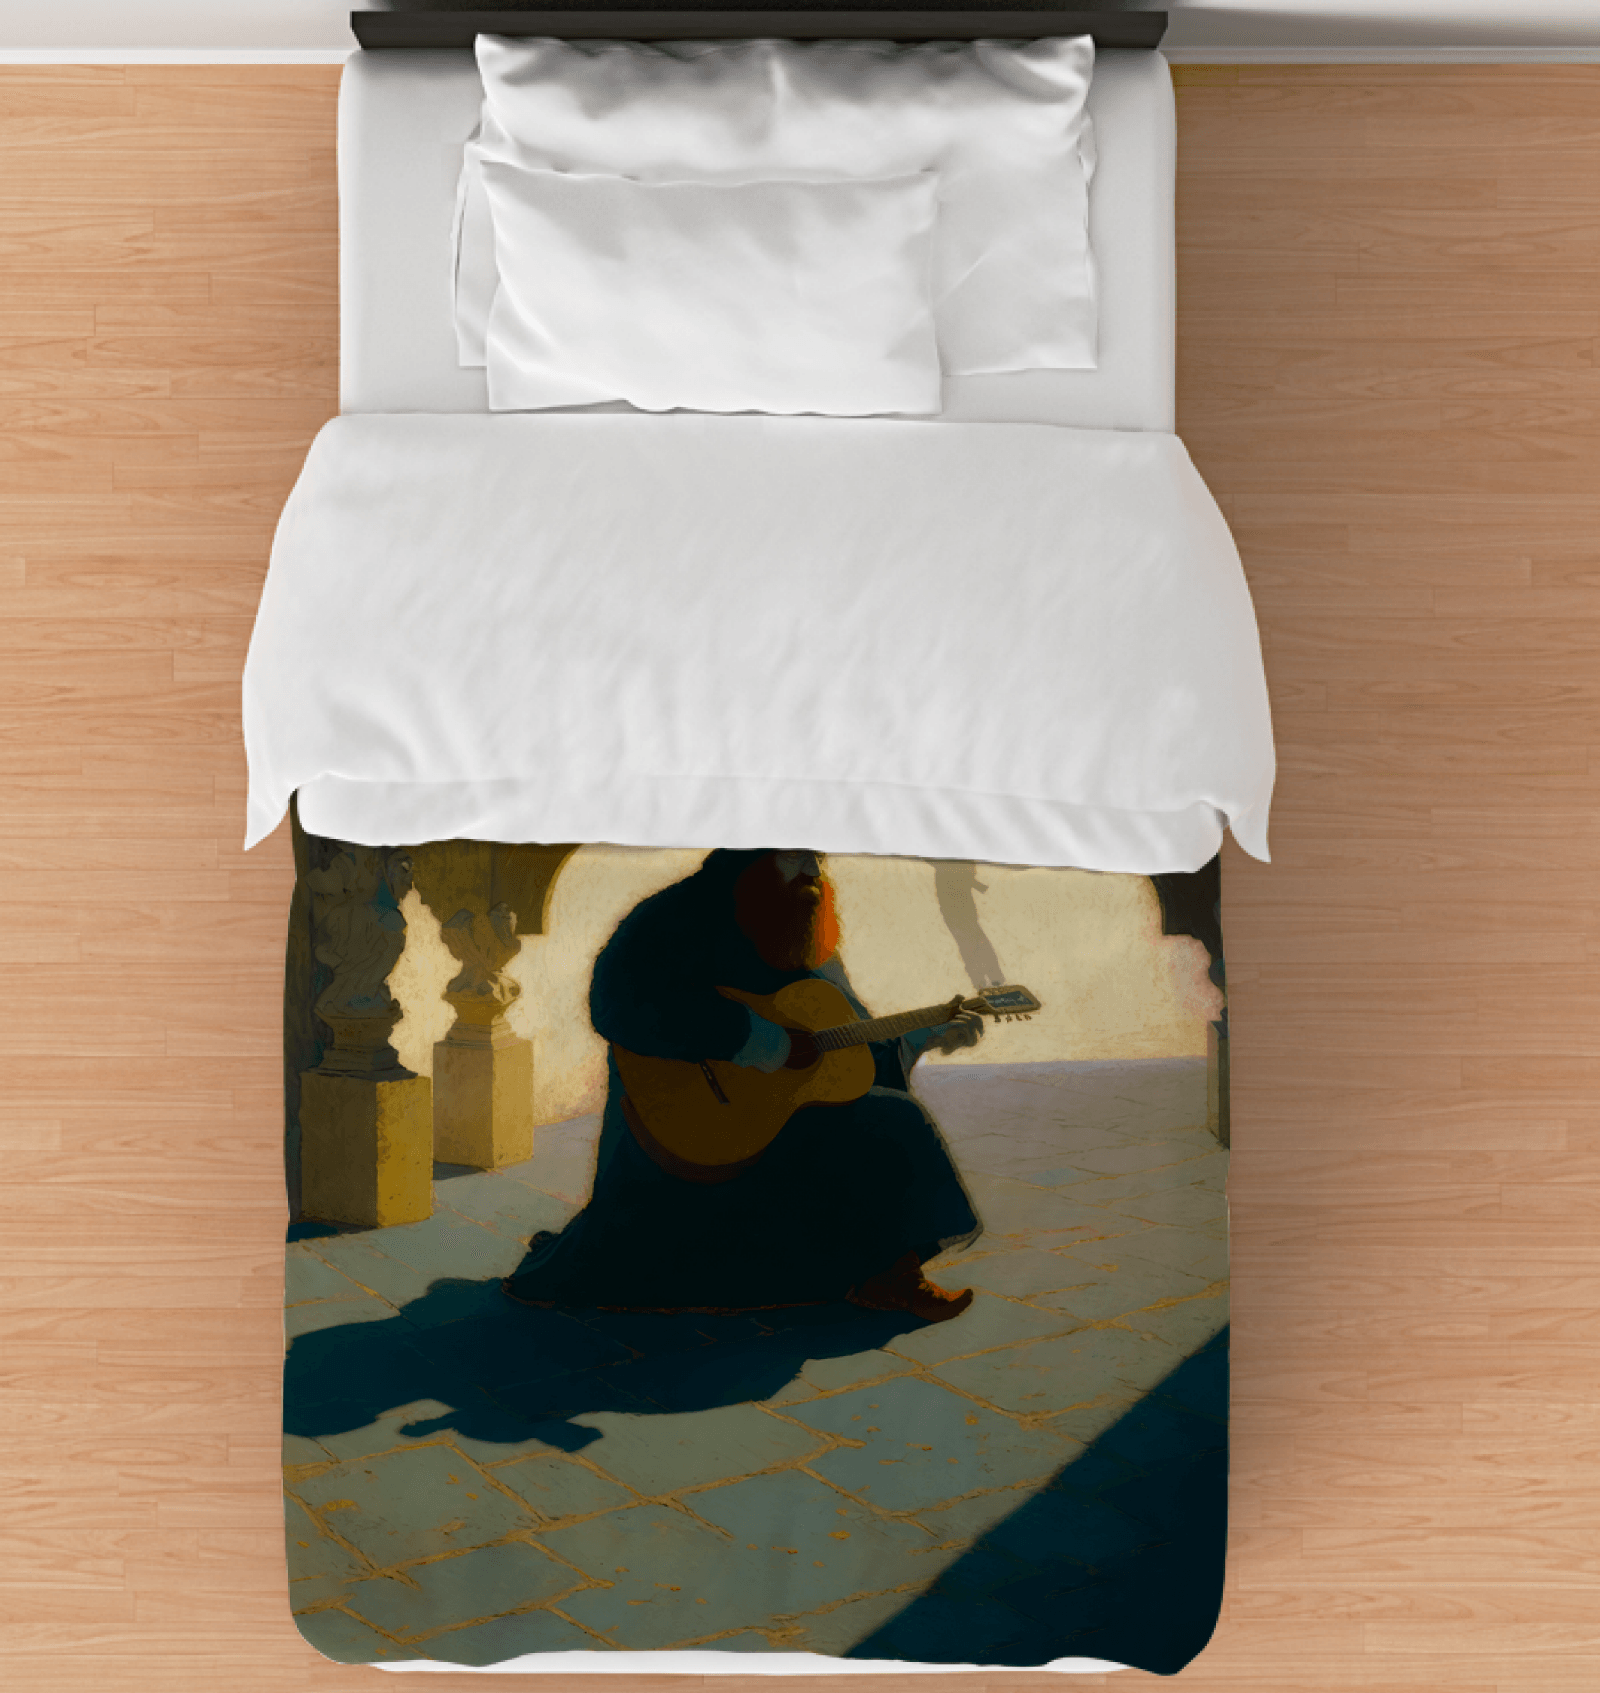 Soothing Sounds Comforter Set: Music Lover's Haven - Beyond T-shirts